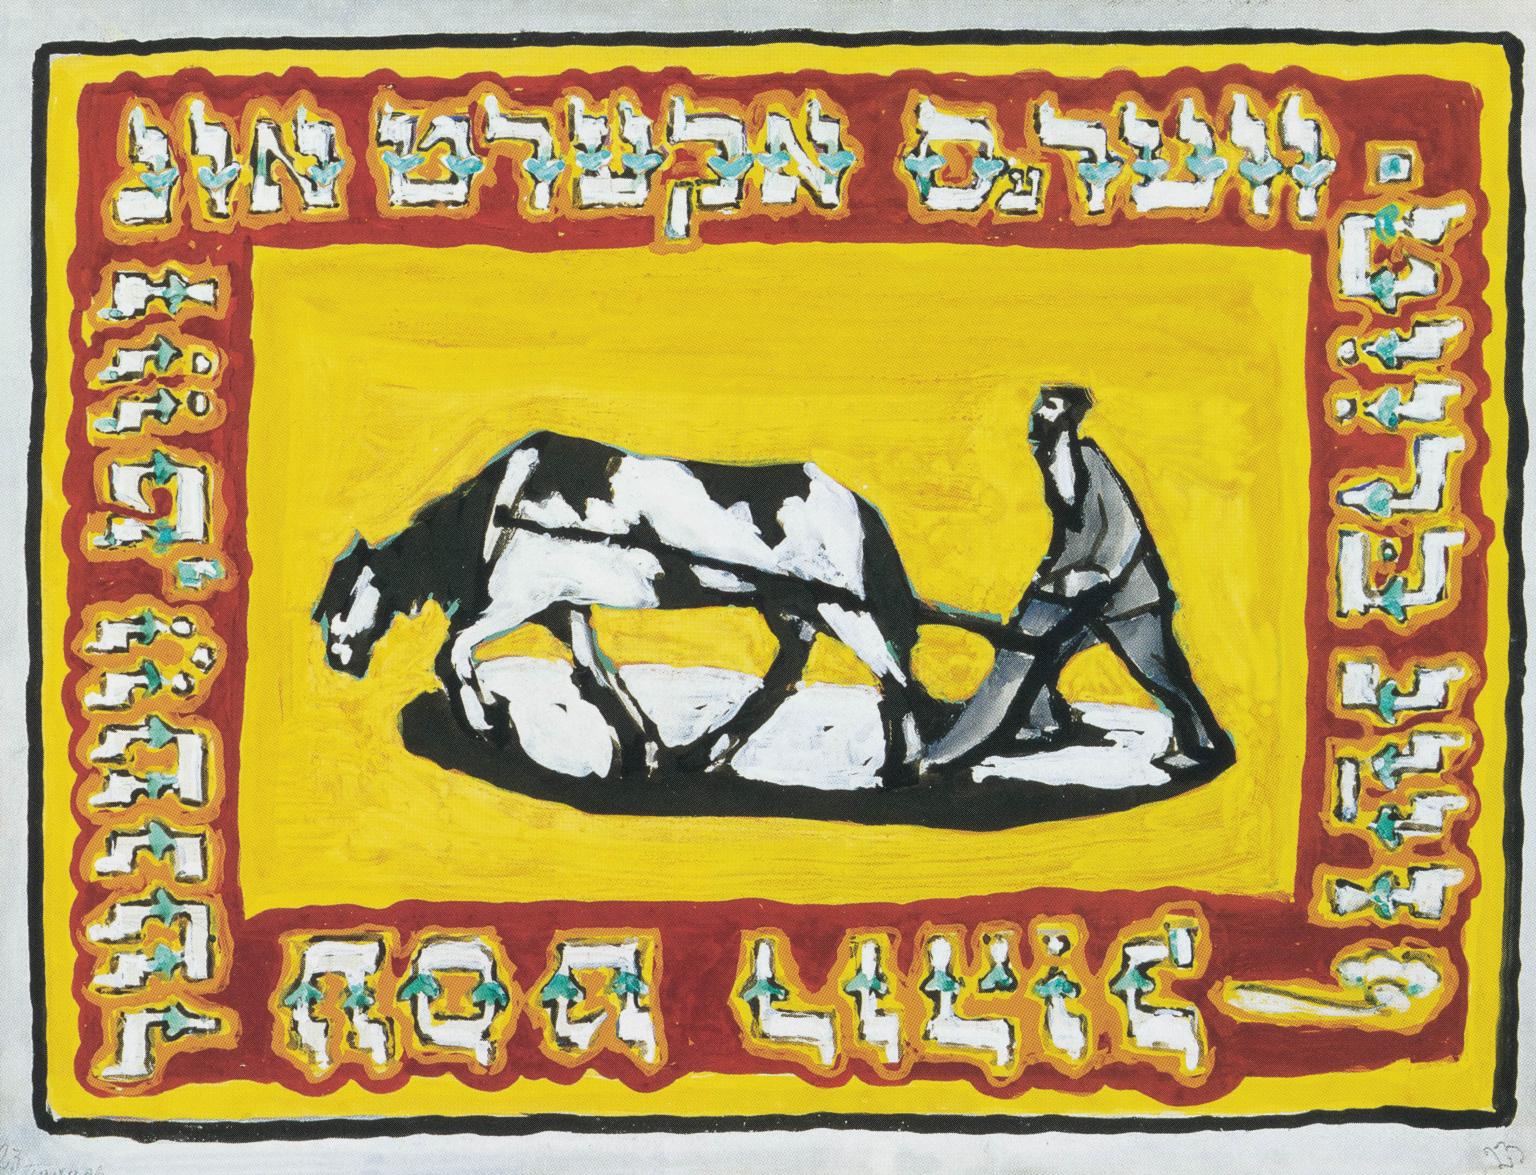 Painting of man behind a ploughing horse, with Yiddish text surrounding the image in a thick border. 